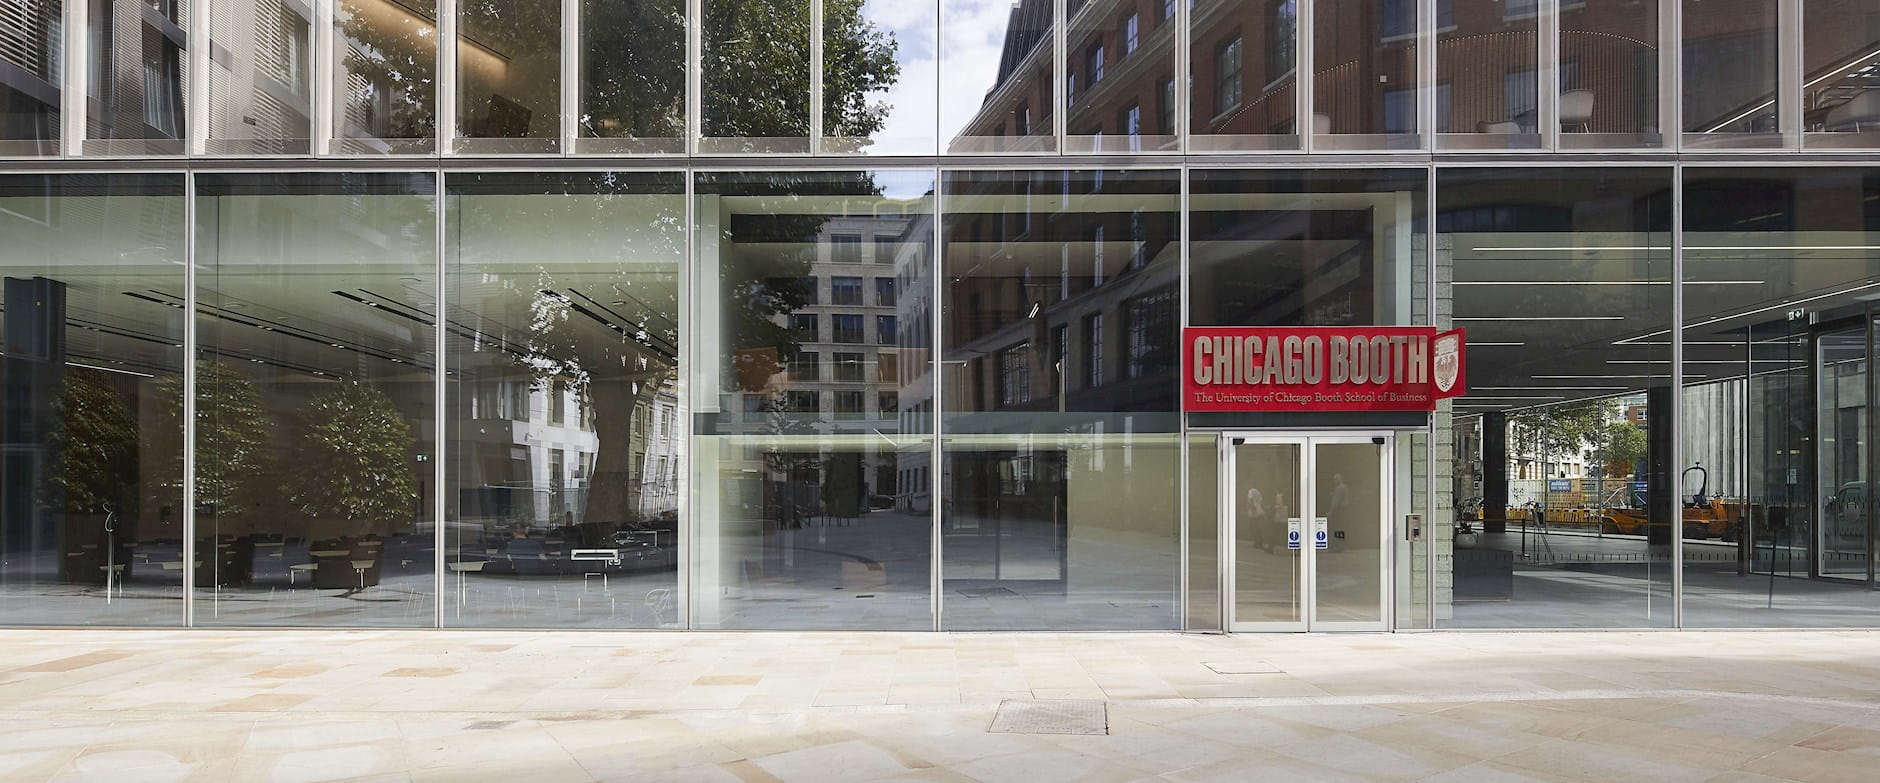 Front view of the London Conference Centre entrance with "Chicago Booth" sign visible